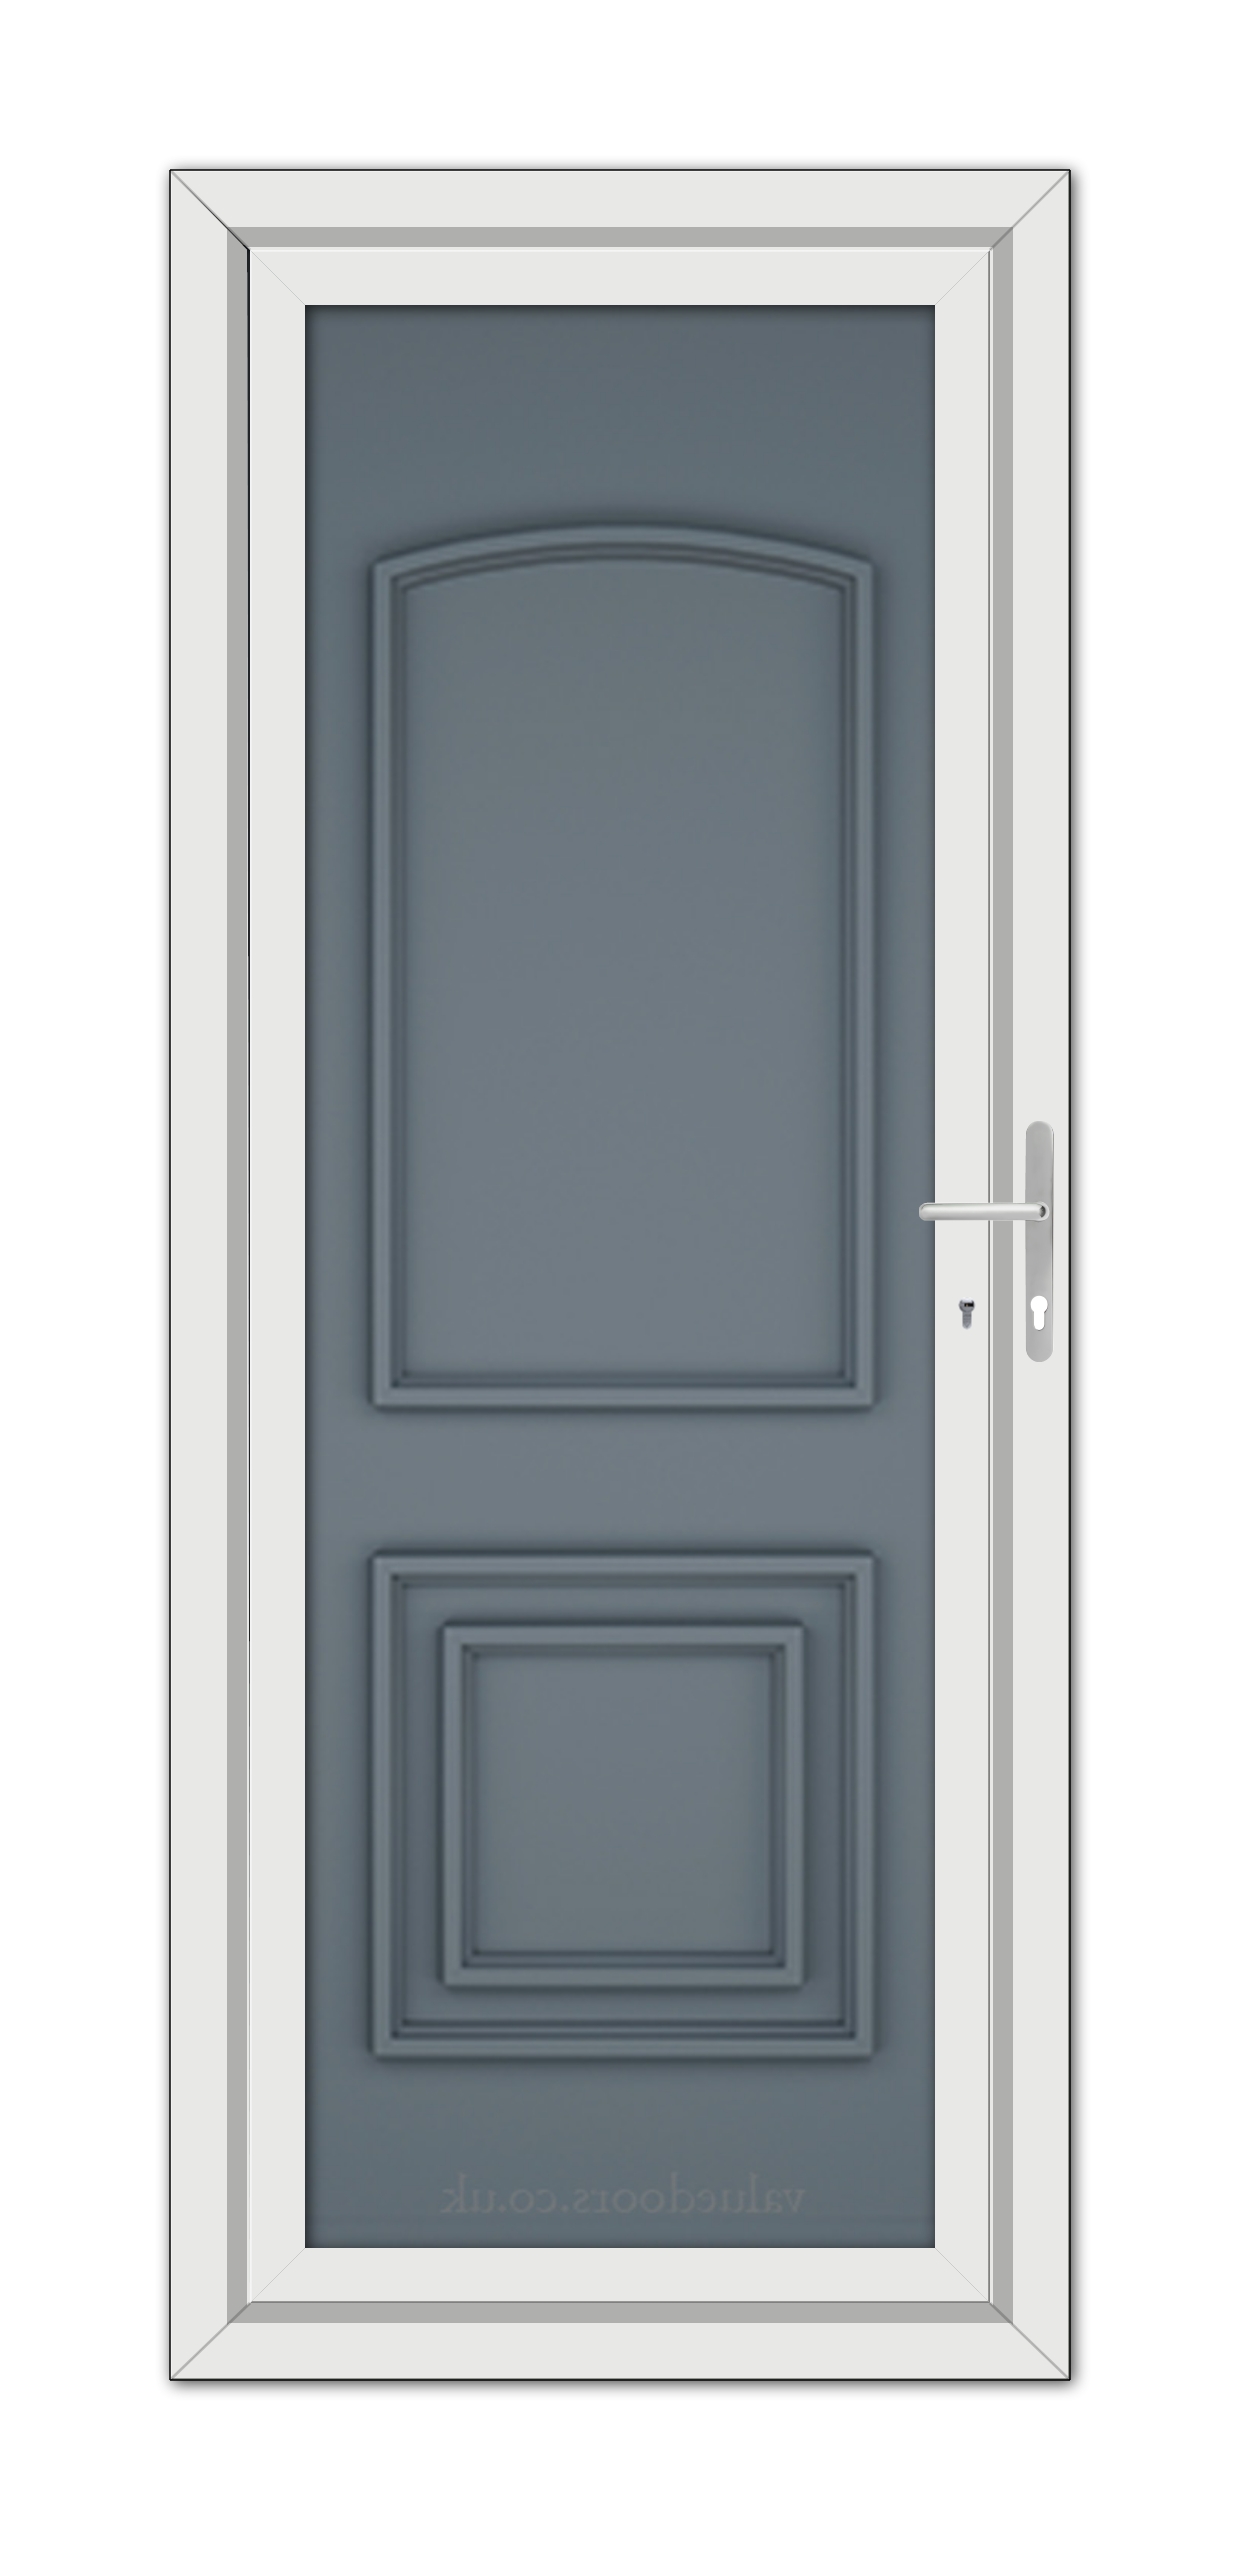 A Slate Grey Balmoral Classic Solid uPVC door with a white frame.